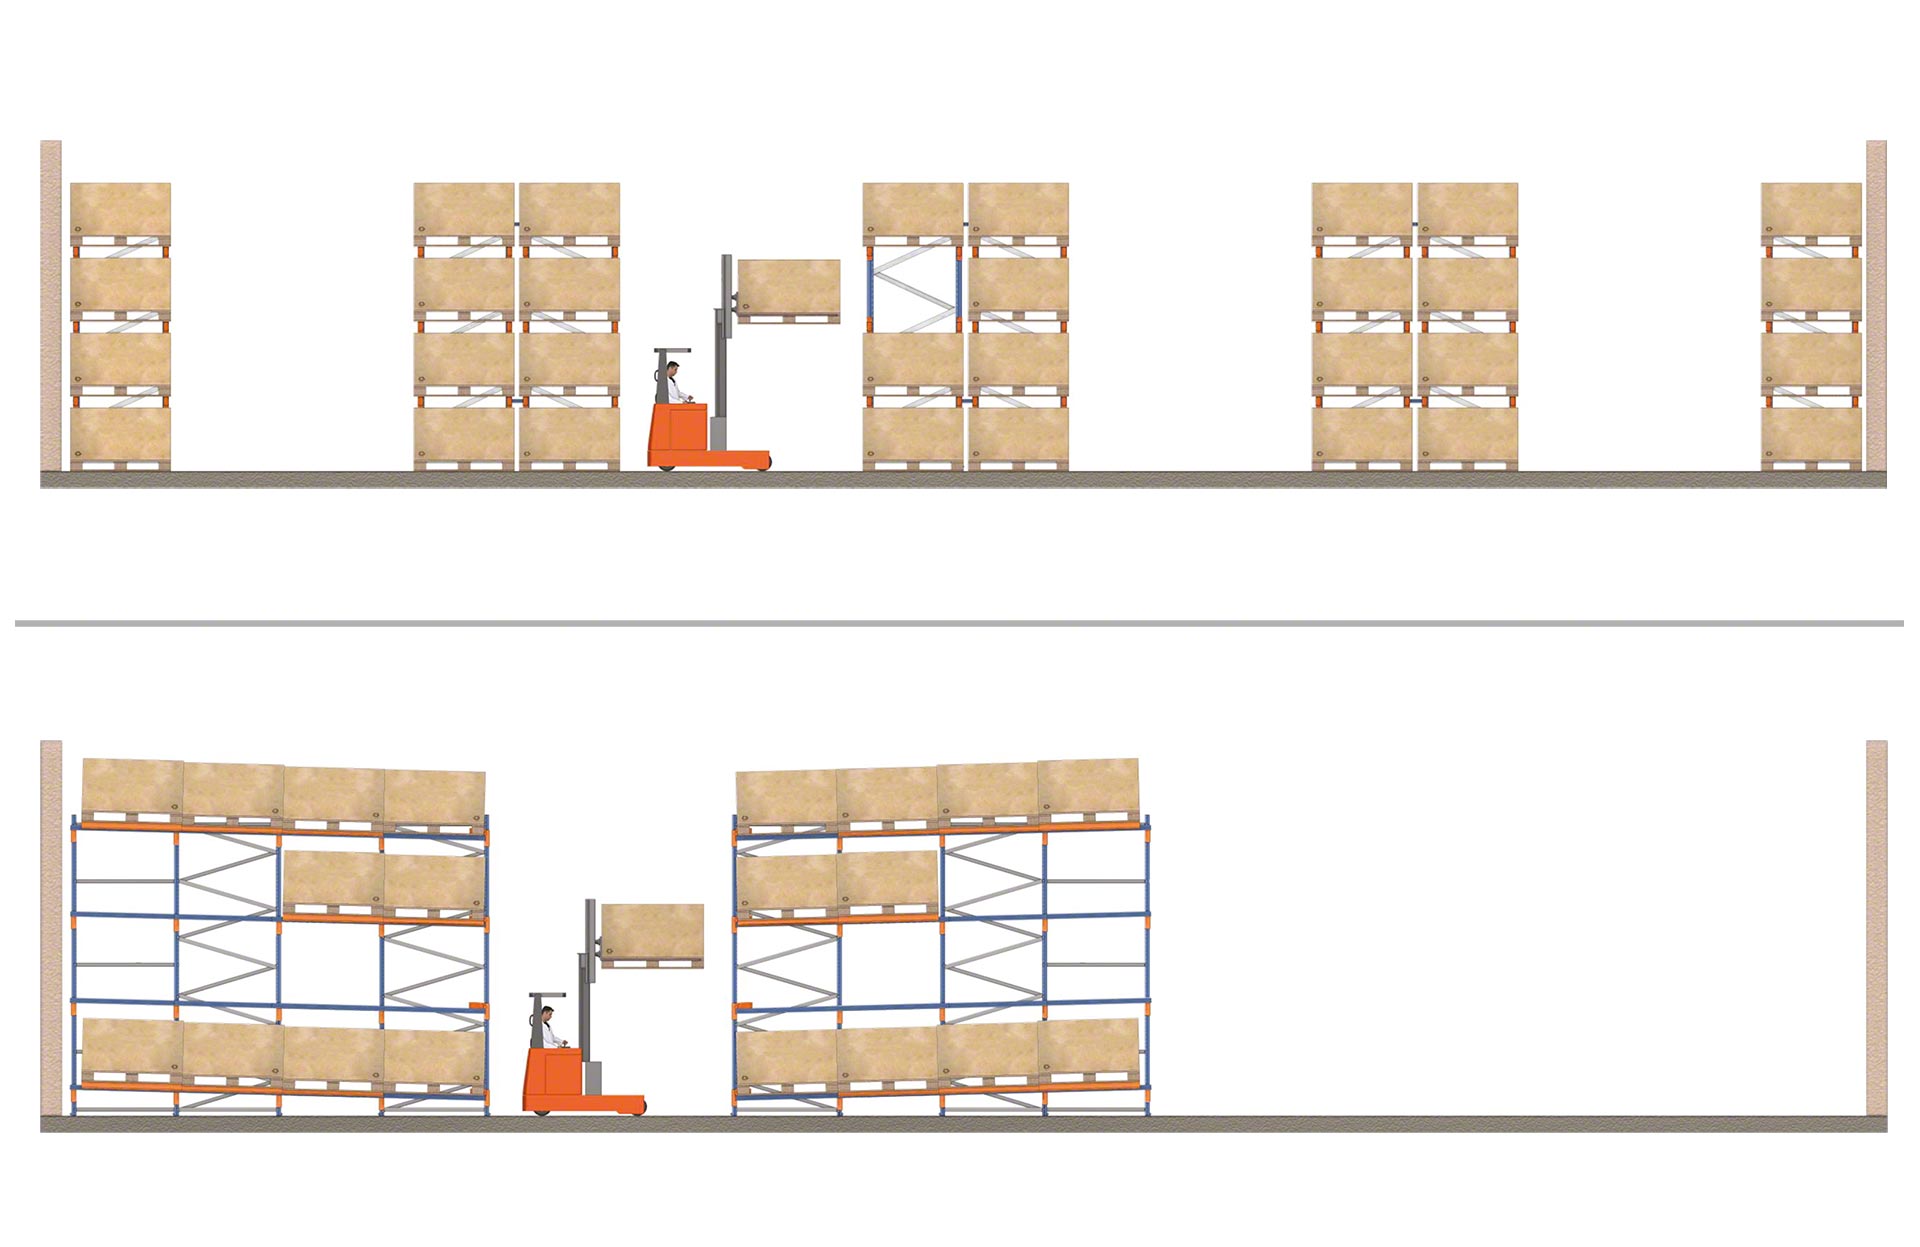 The push-back system saves a significant amount of space compared to adjustable pallet racking